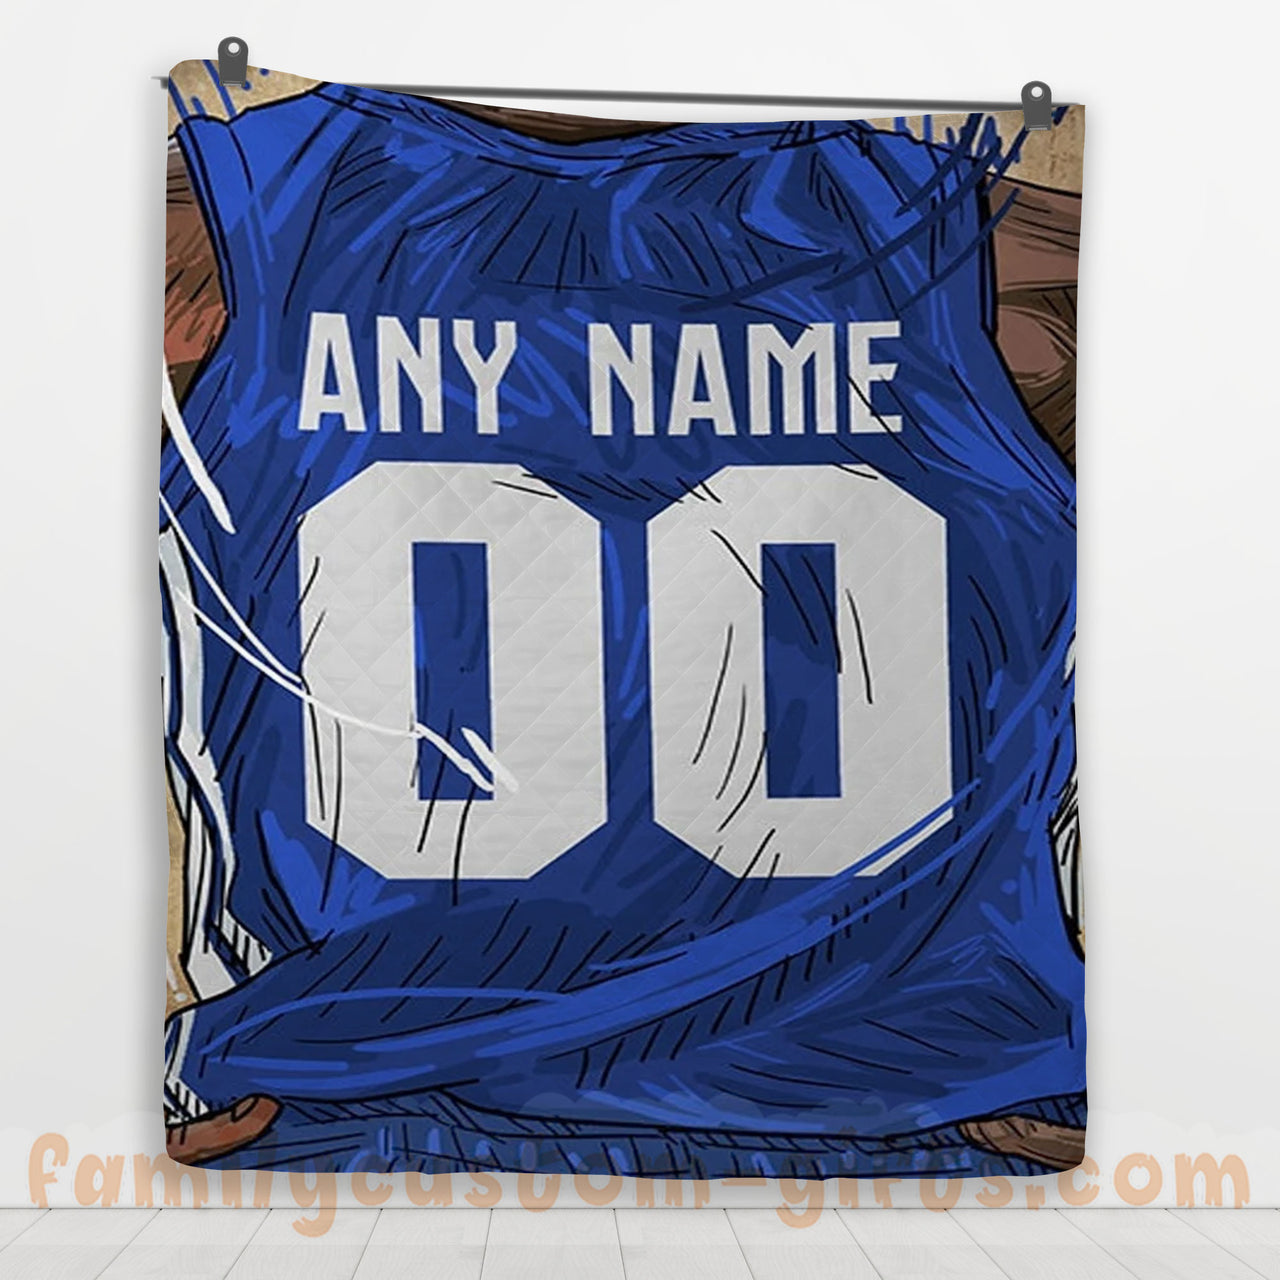 Custom Premium Quilt Blanket North Carolina Jersey Basketball Personalized Quilt Gifts for Her & Him